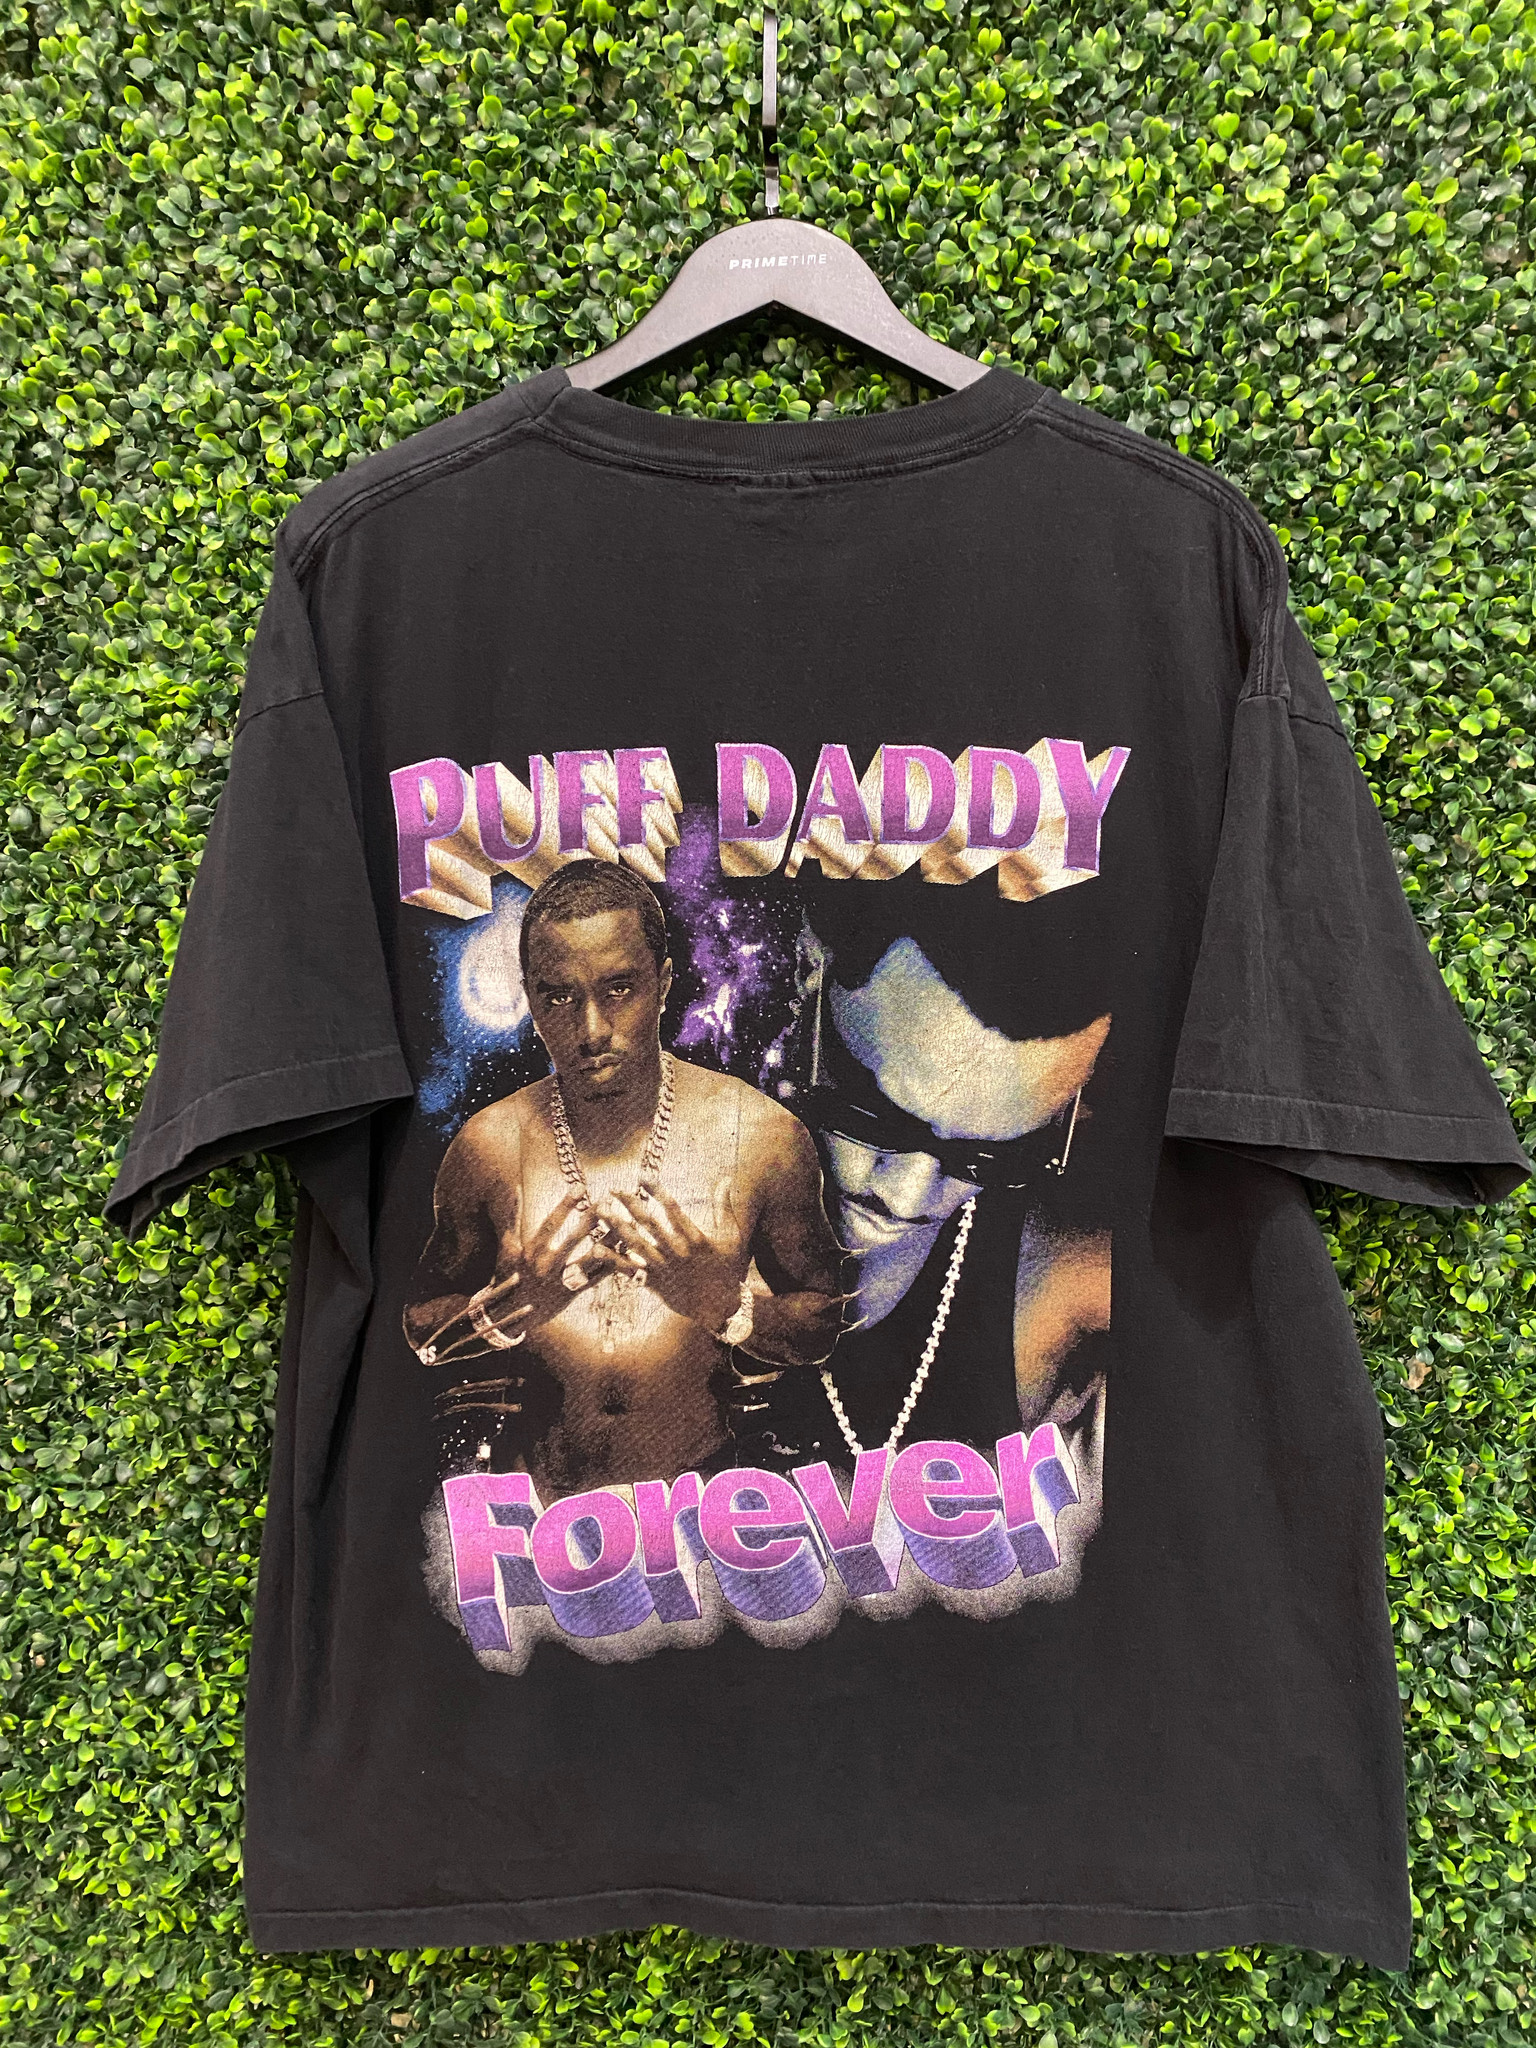 Vintage 90s Puff Daddy Rap Tee - Tシャツ/カットソー(半袖/袖なし)